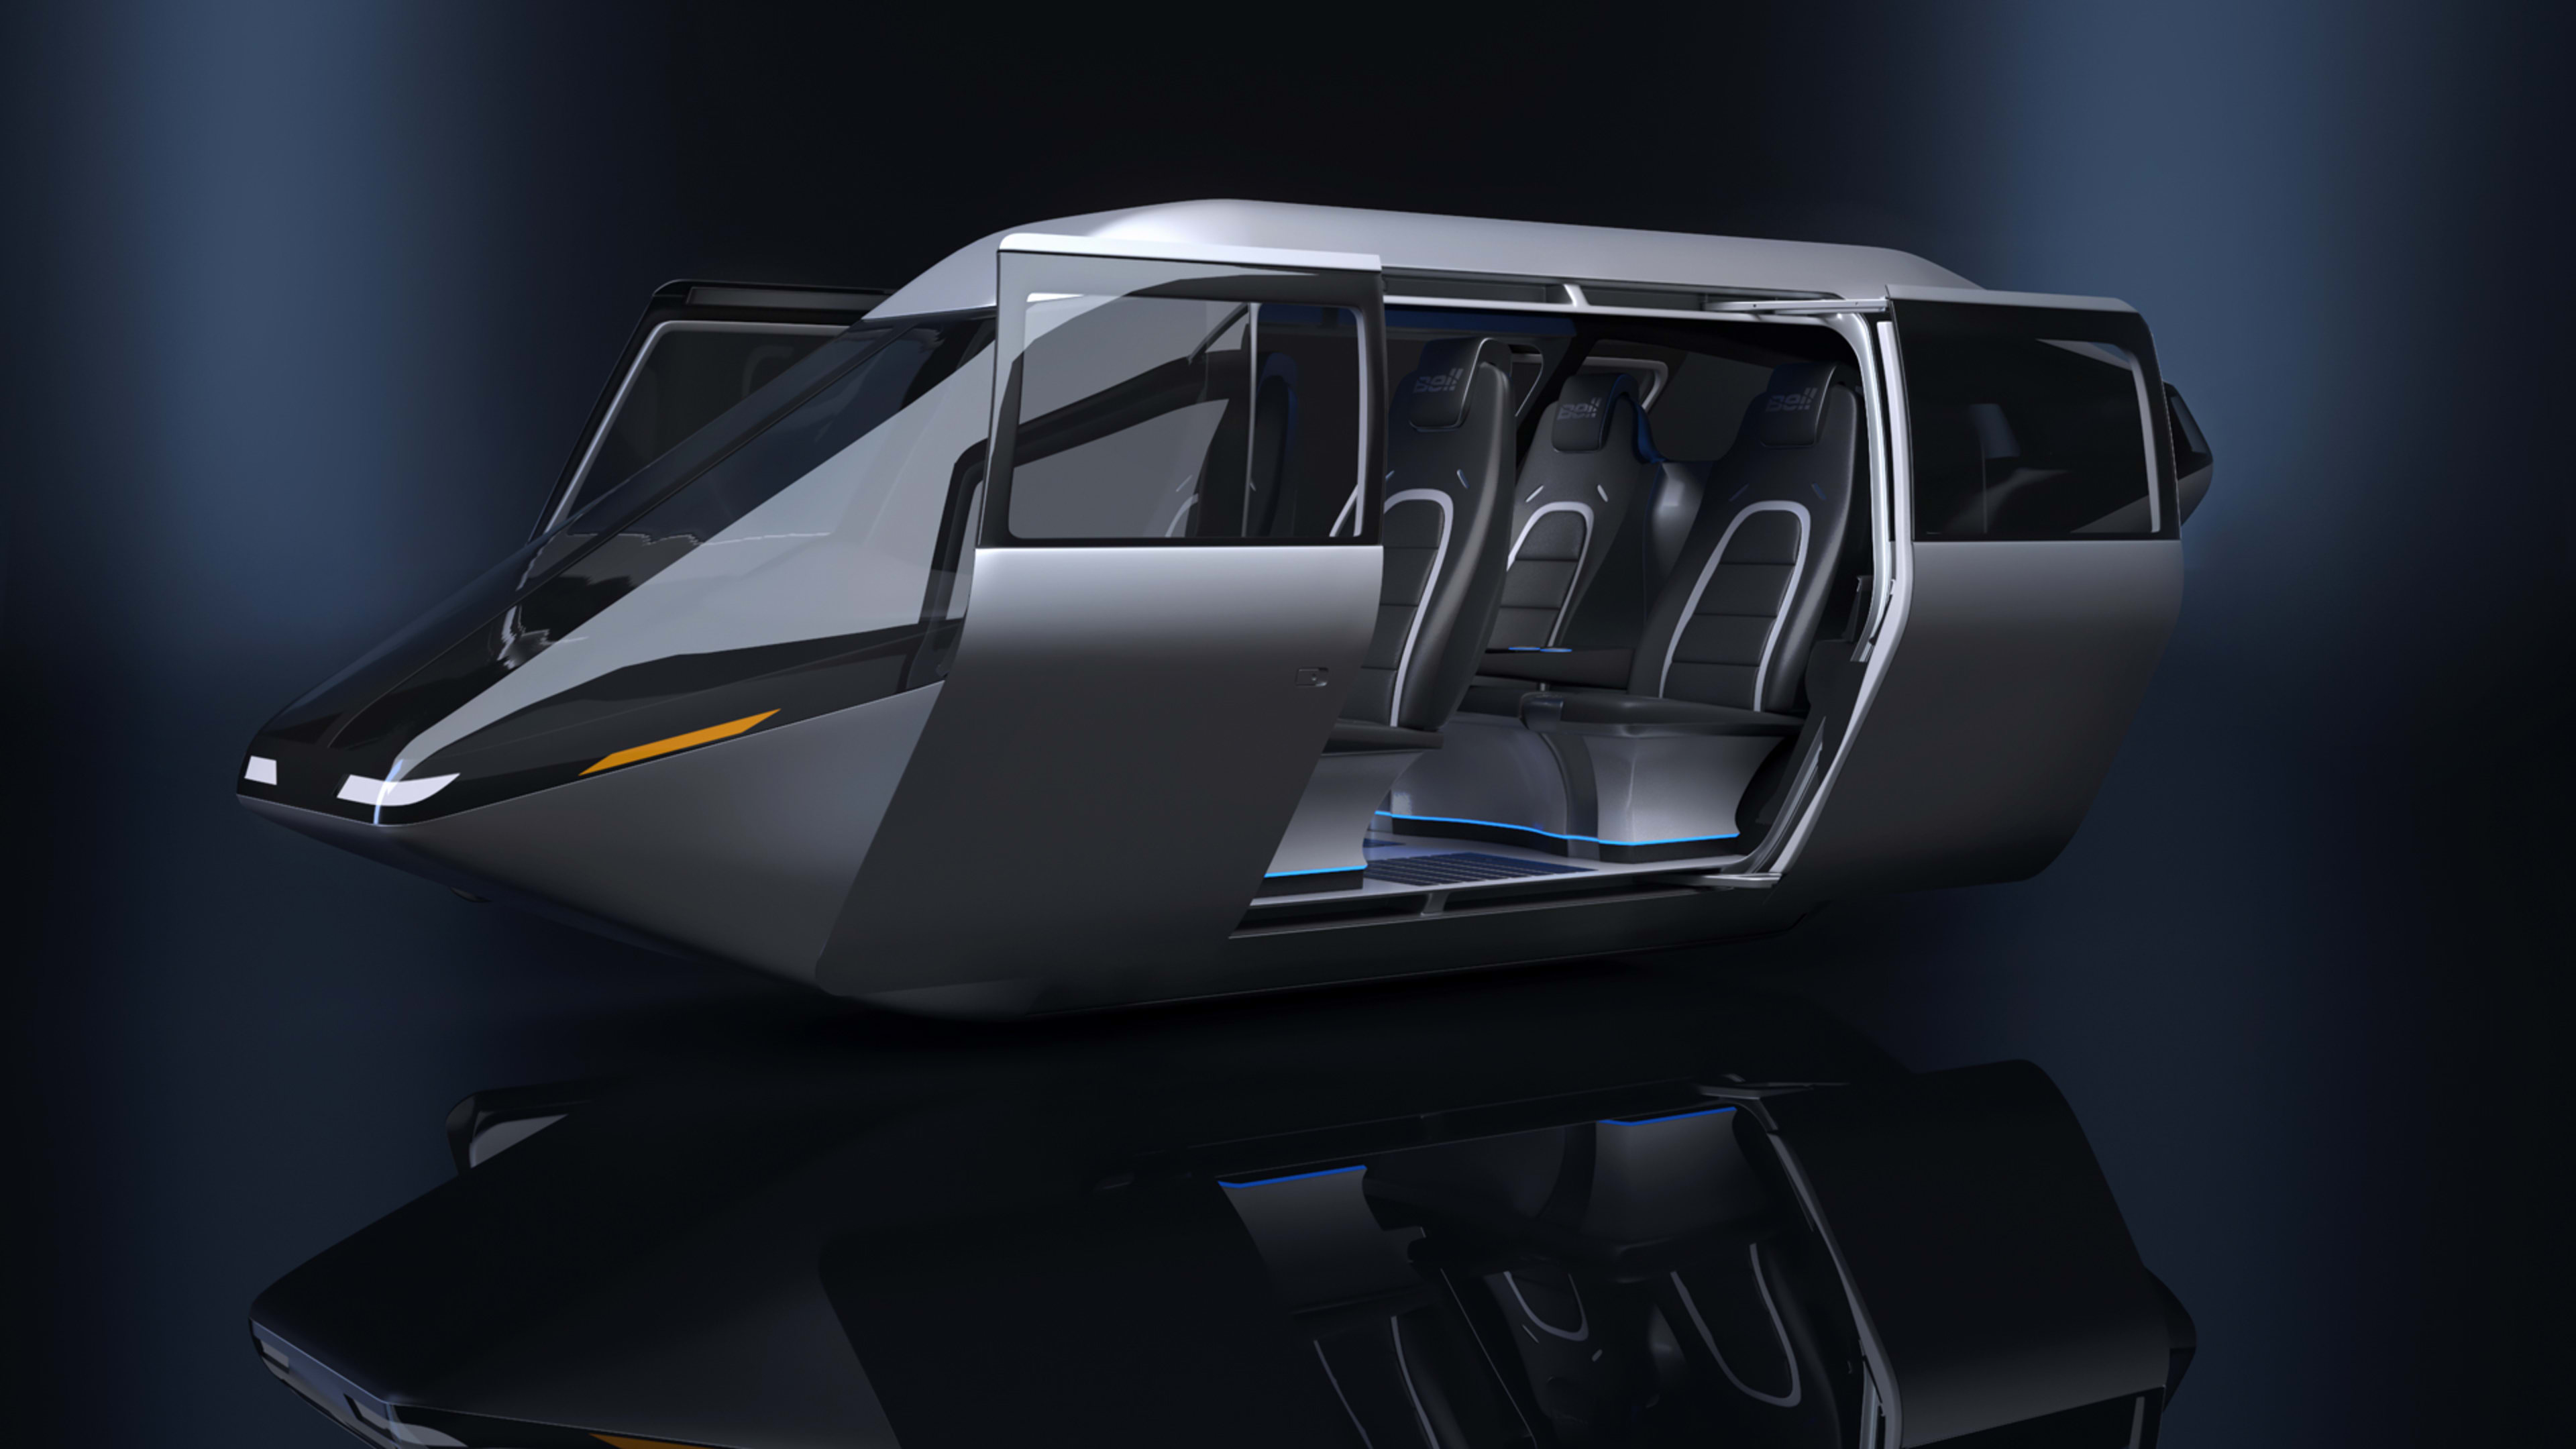 Uber’s Robo Air Taxi—Or At Least Part Of It—Debuts at CES